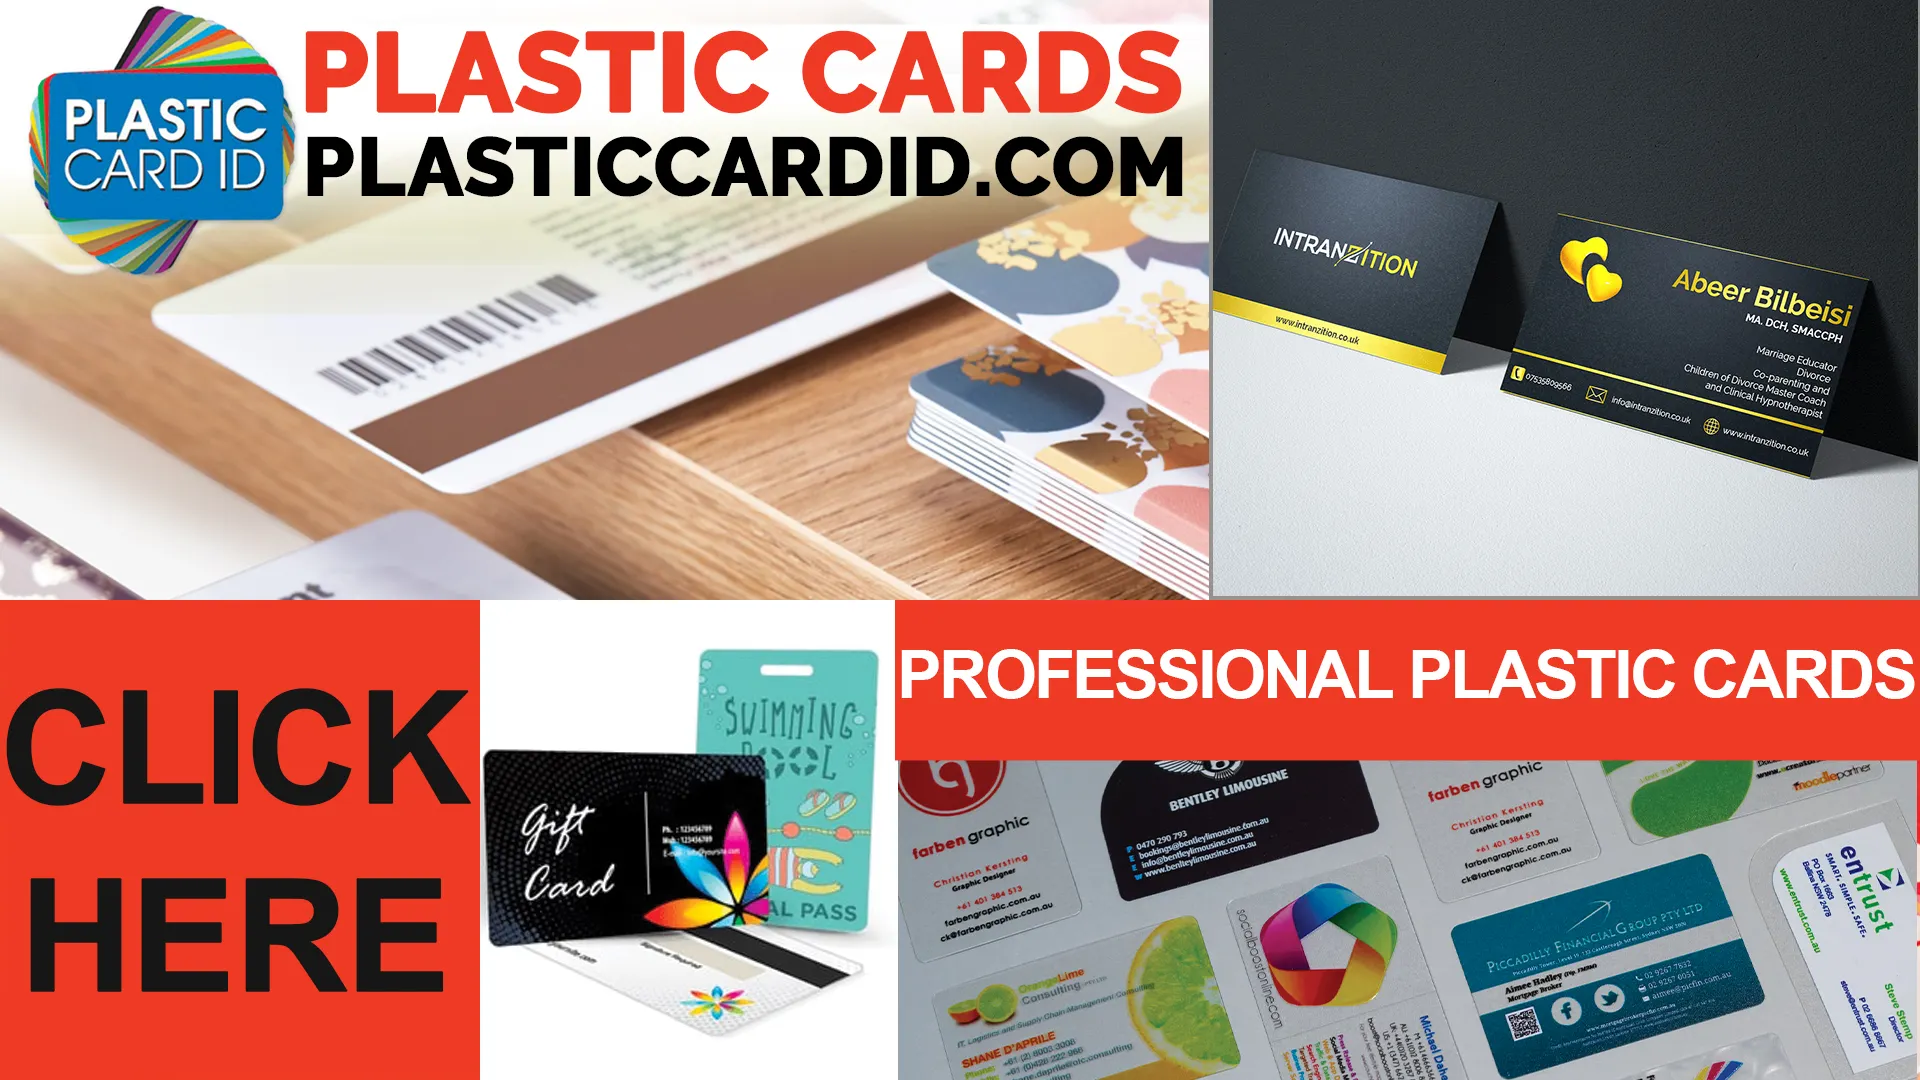 Plastic Card Printers and Refills Just a Call Away